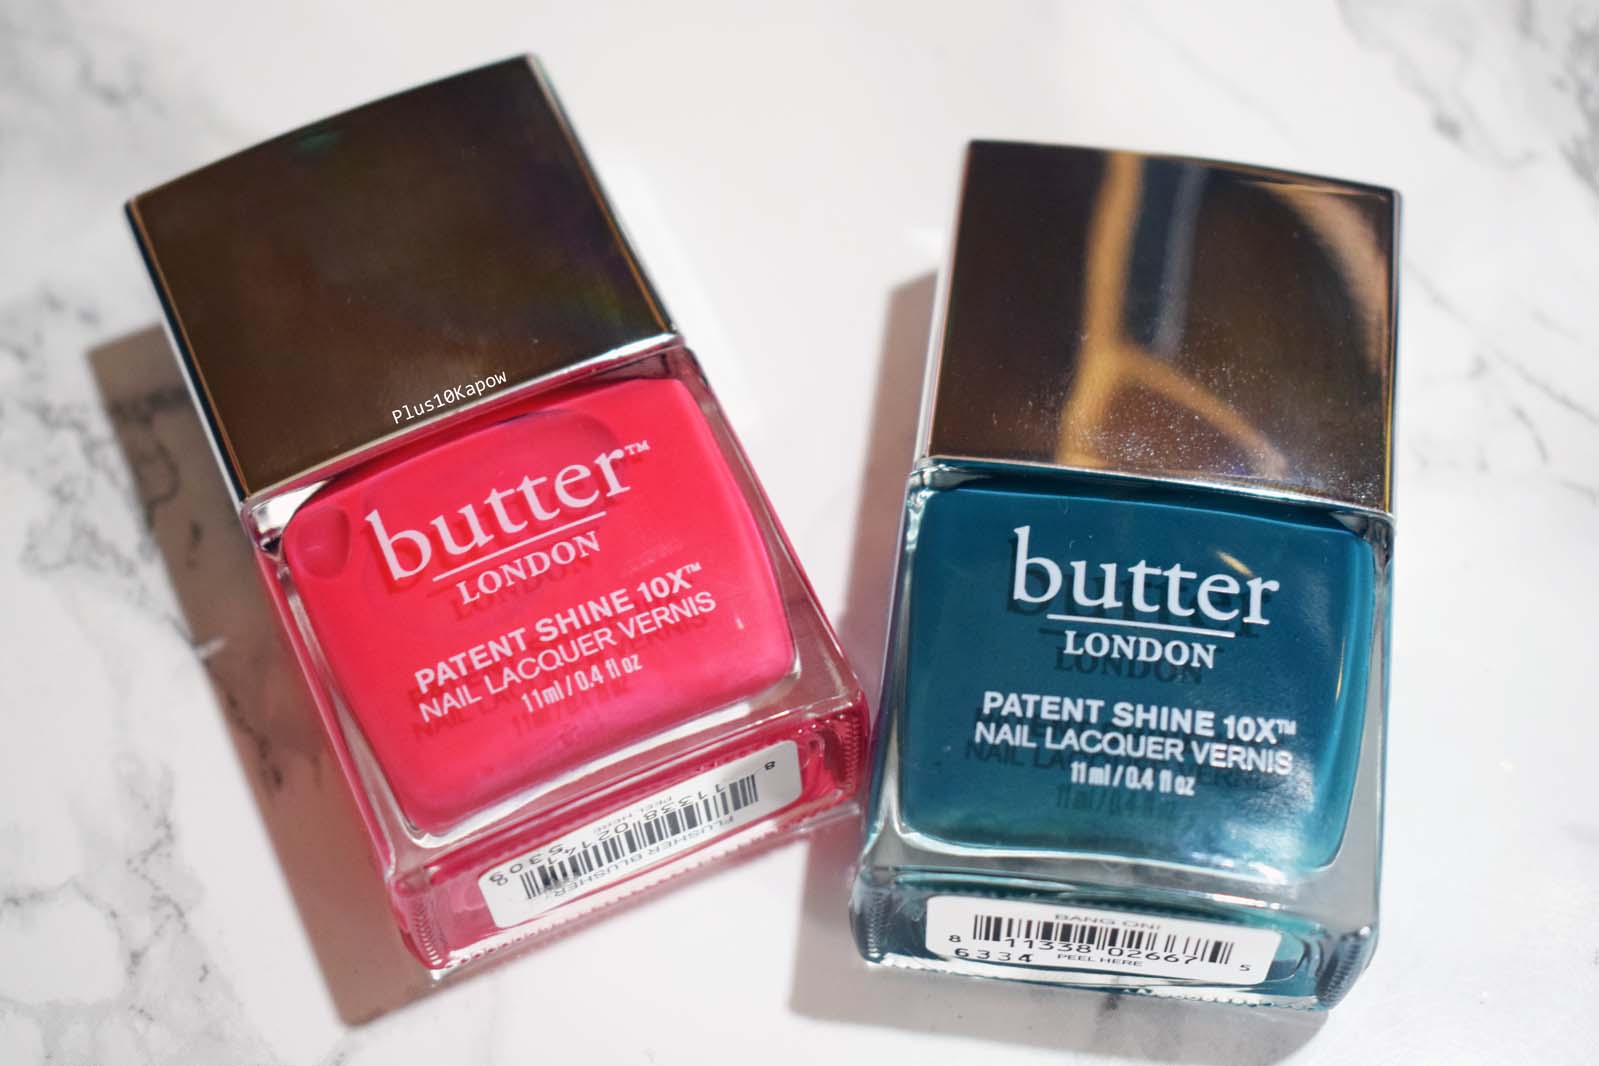 Butter London Patent Shine 10X Nail Lacquer in "The Color to Watch" - wide 6